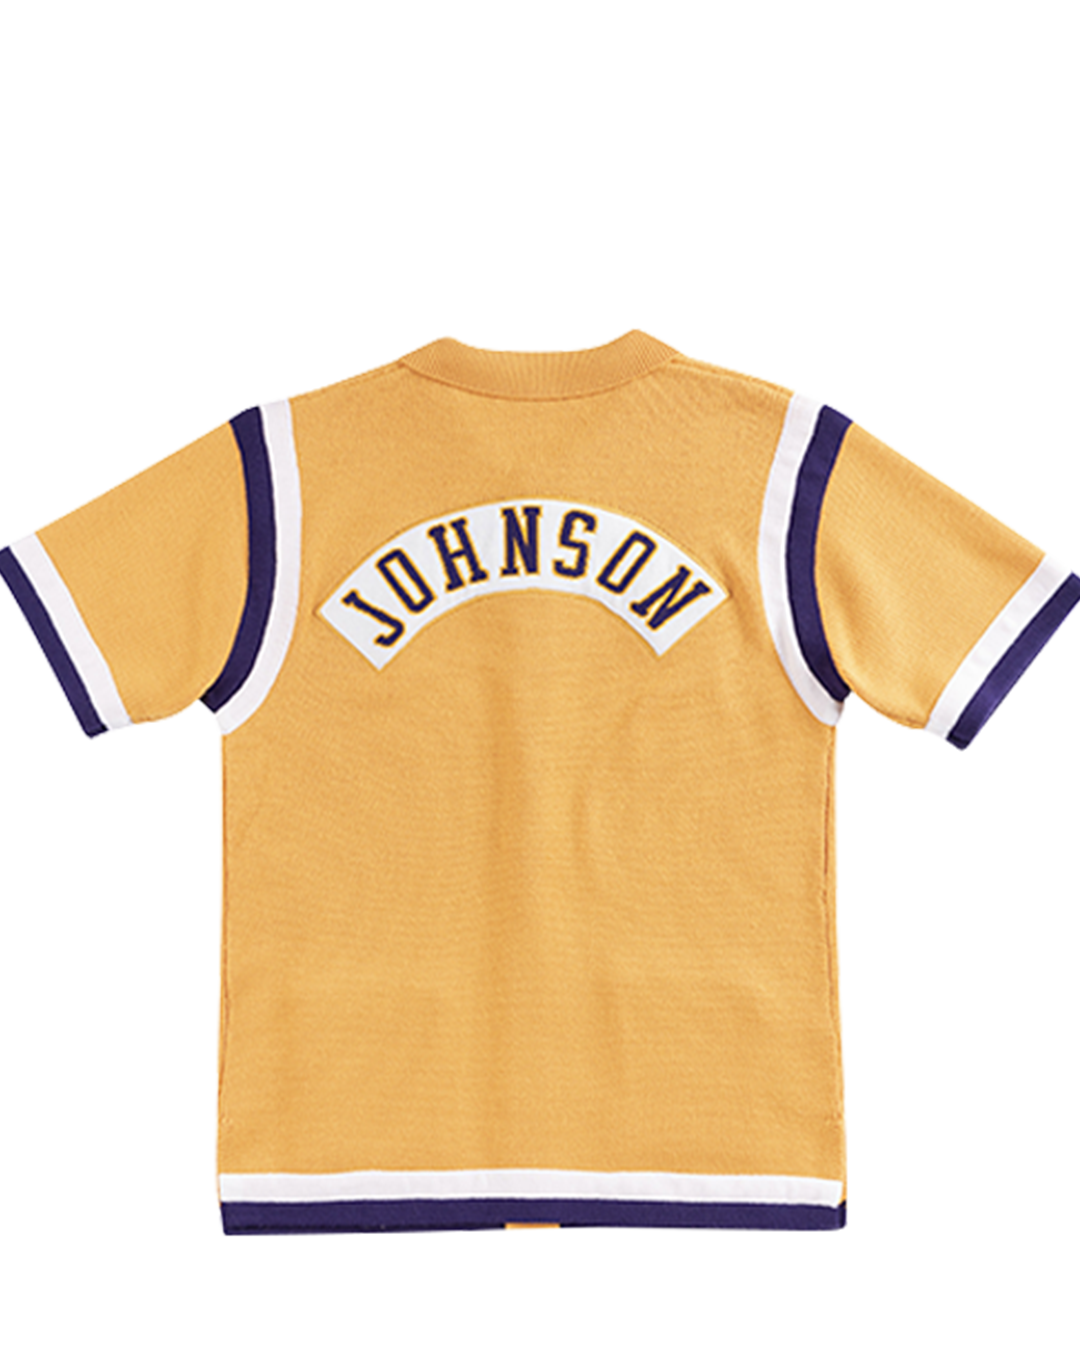 Lakers Store (Lakersstore)  Official Pinterest account